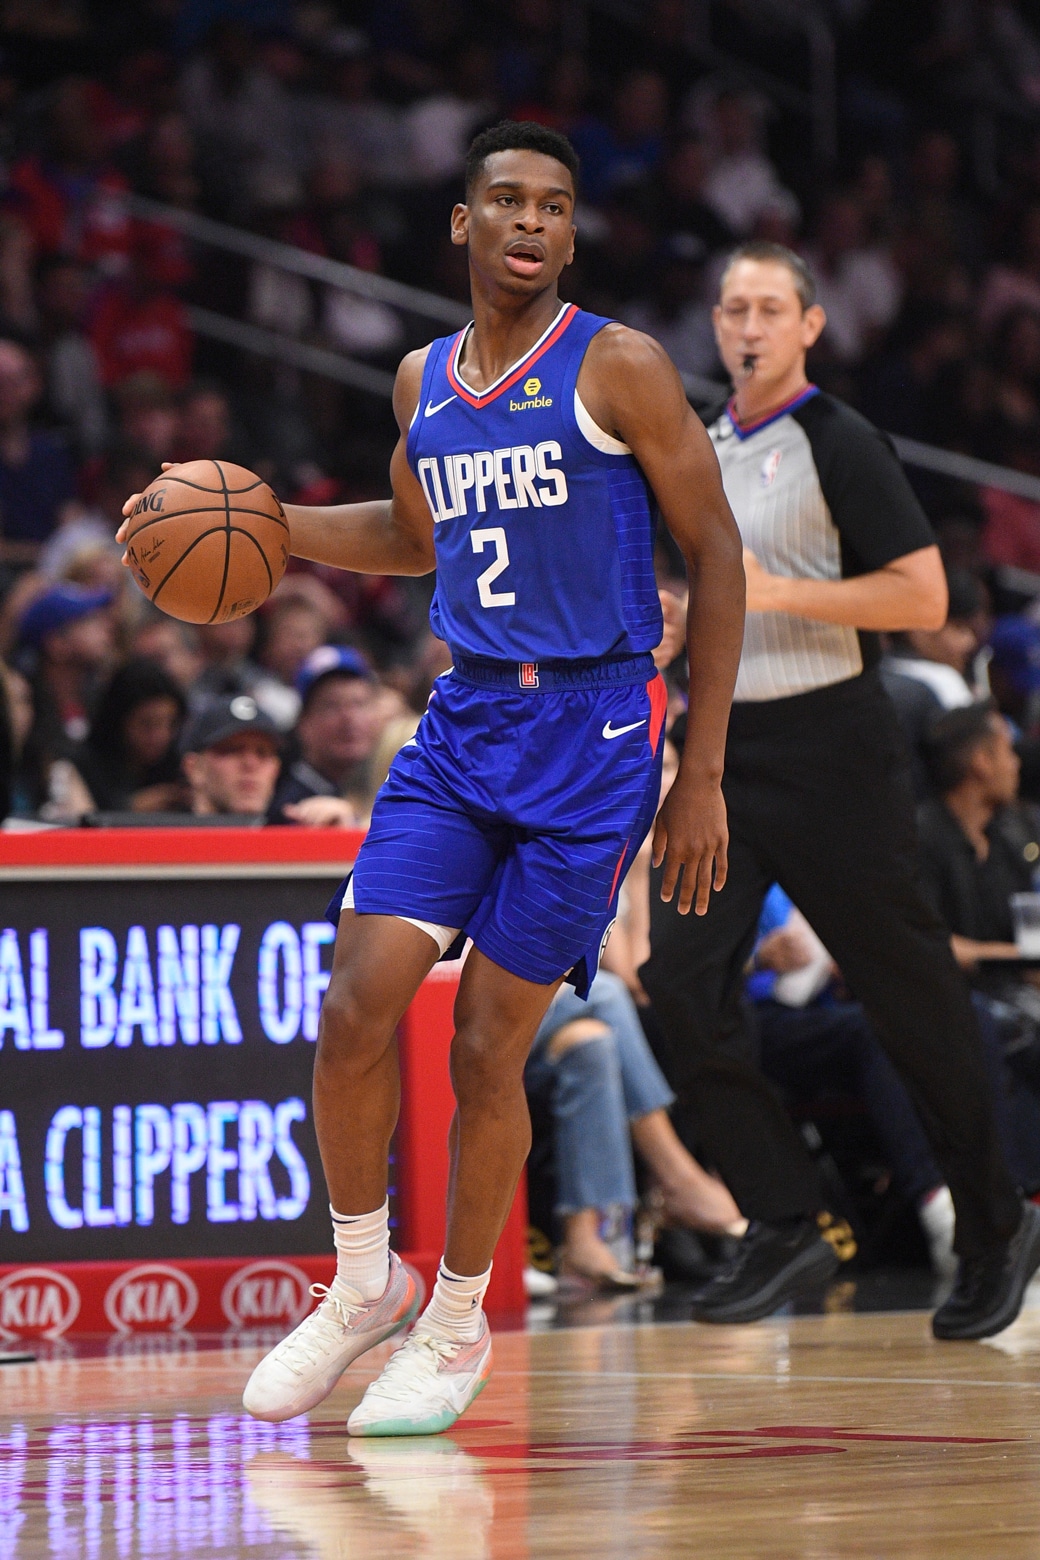 Shai Gilgeous-Alexander, Scouting report and accolades